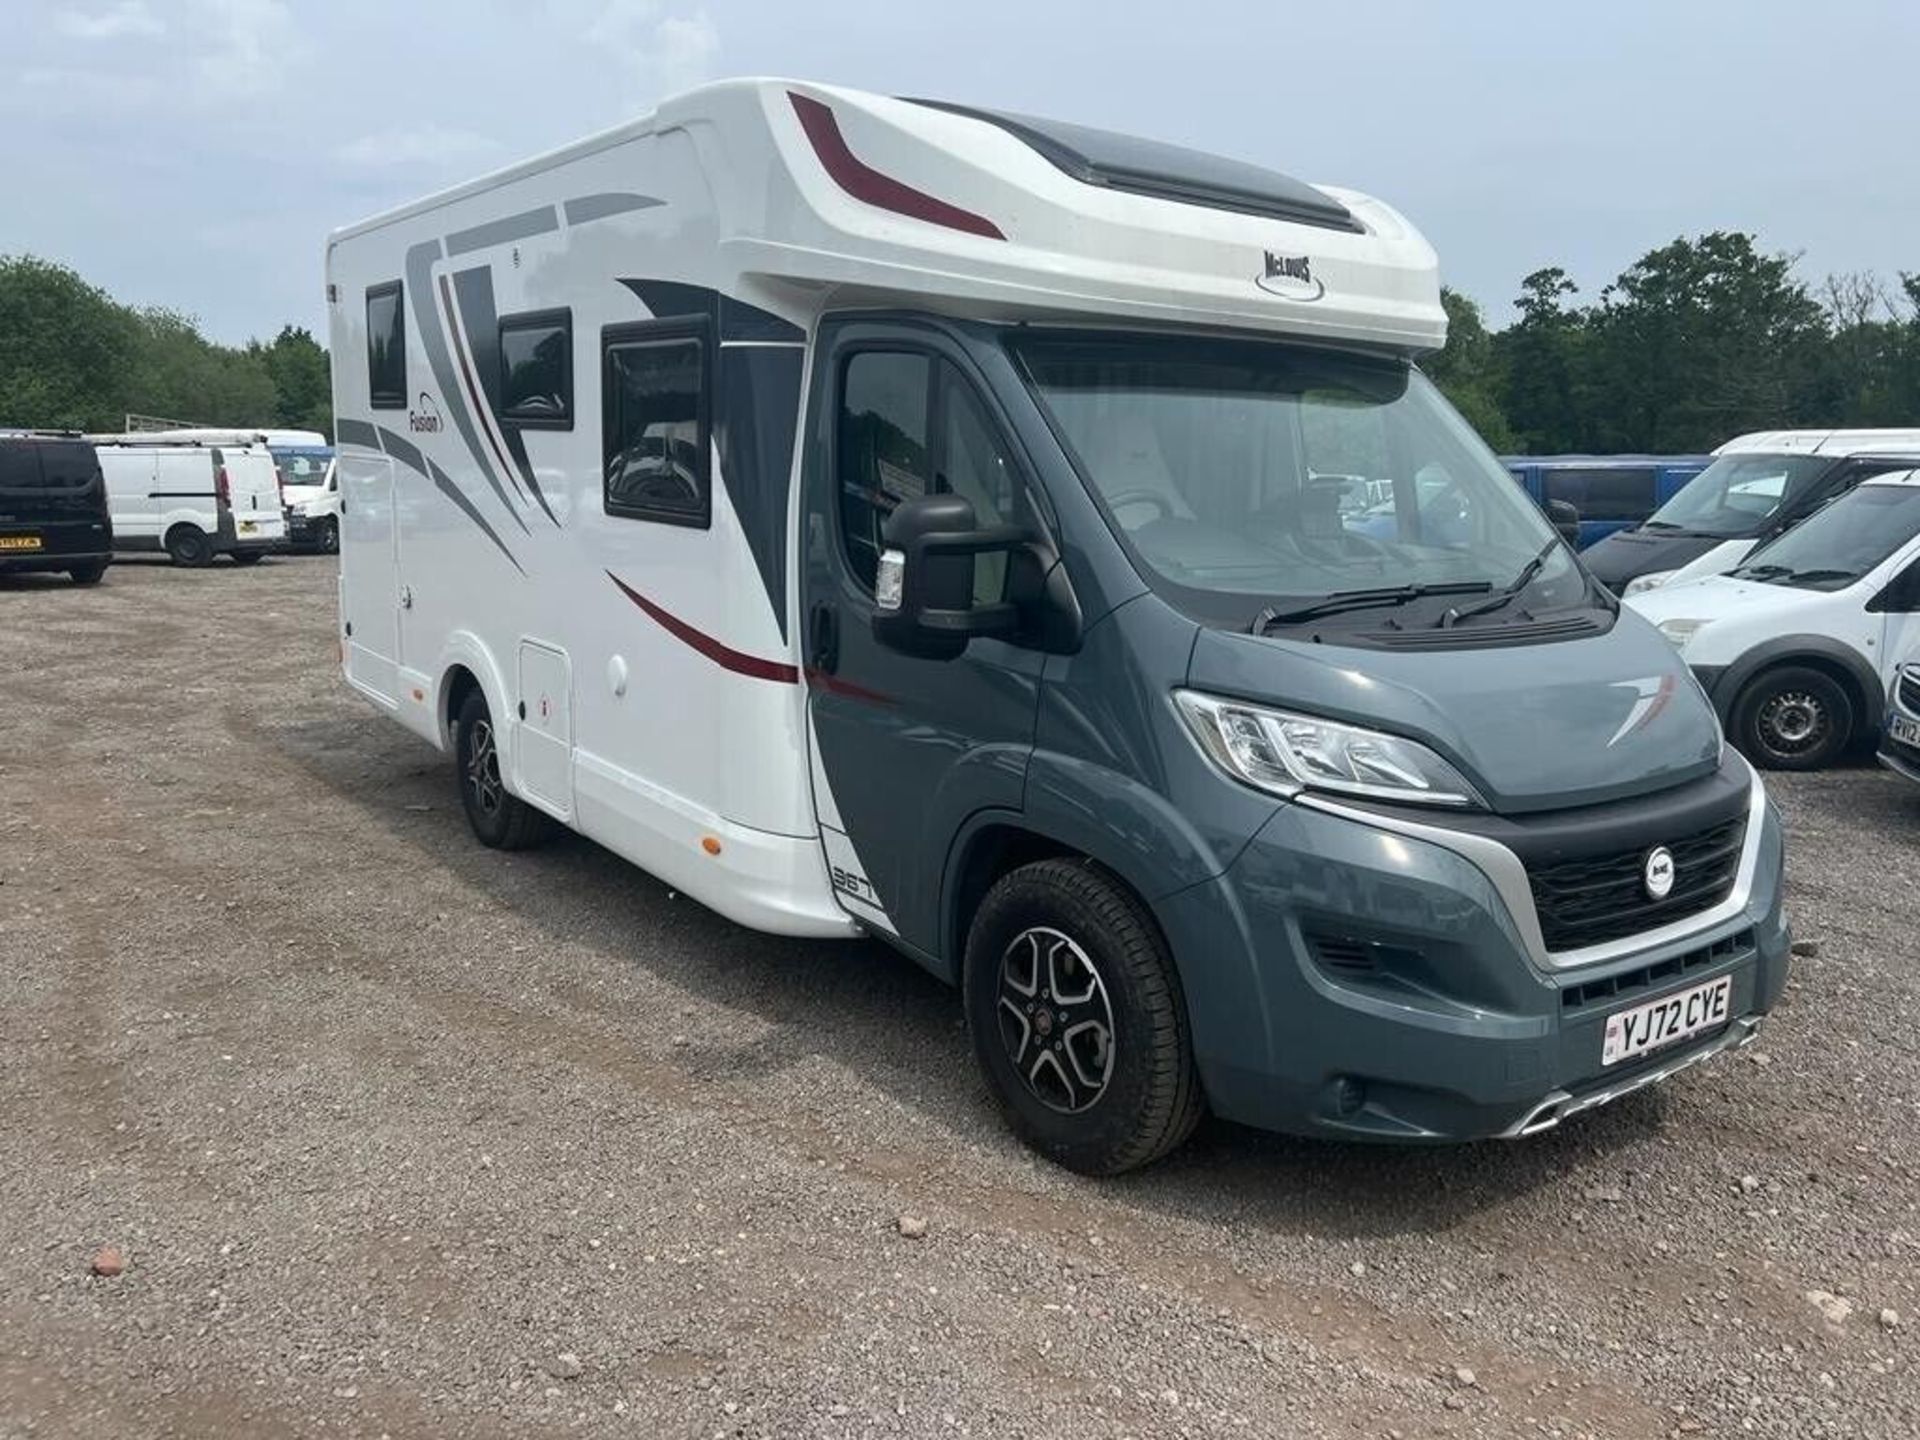 2 PLATE FIAT MCLOUIS FUSION 367: IMMACULATE MOTORHOME JOY >>--NO VAT ON HAMMER--<< - Image 2 of 15